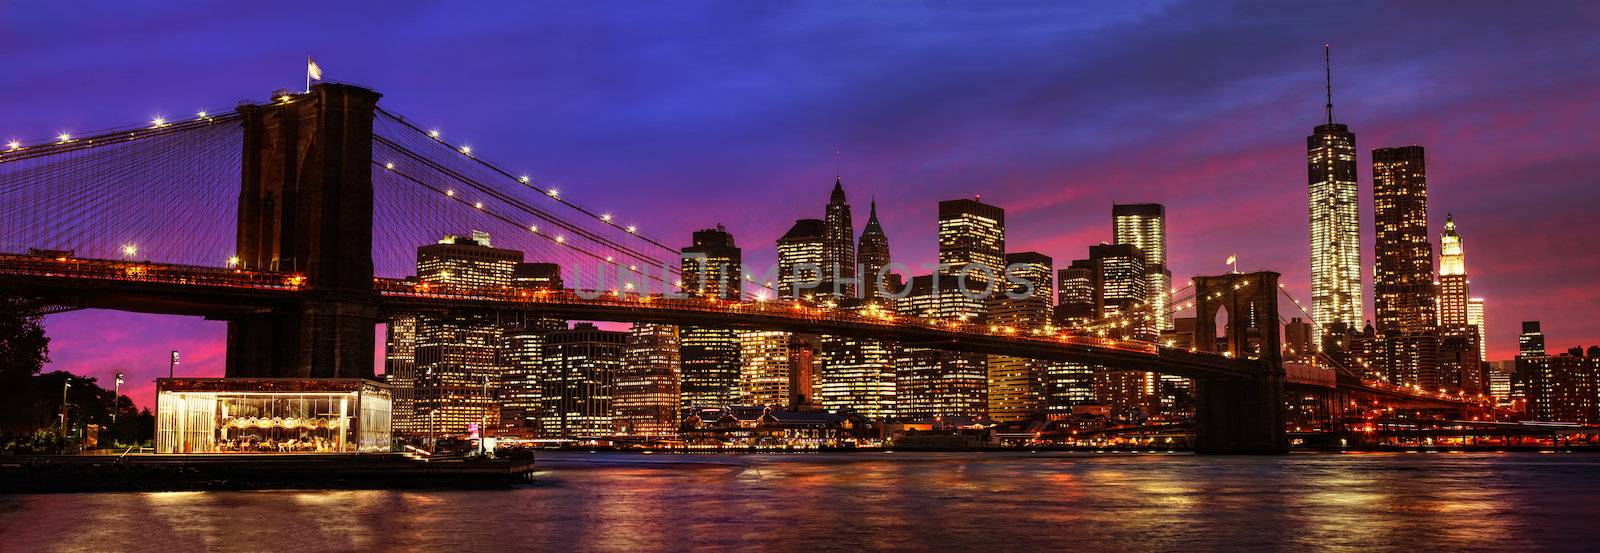 Panorama of Brooklyn Bridge, East River and Manhattan at sunset with lights and reflections. New York